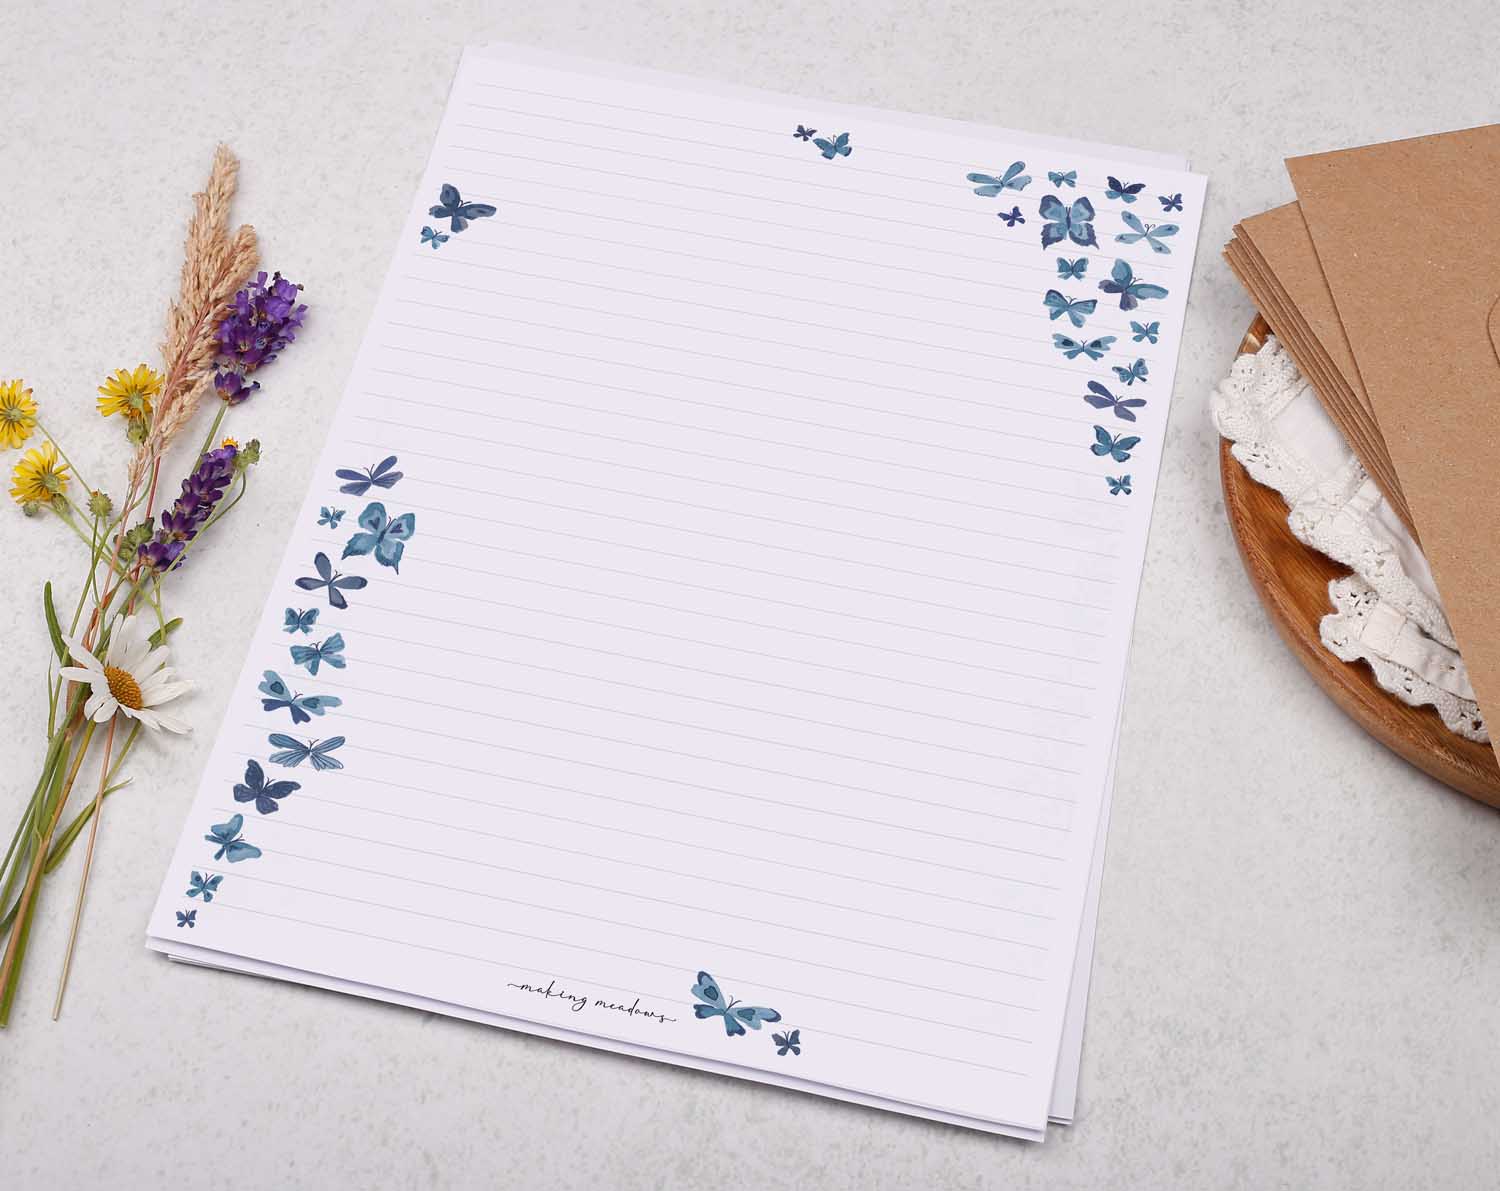 A4 letter writing paper sheets with blue cascading butterflies fluttering around the paper in a delicate pattern.